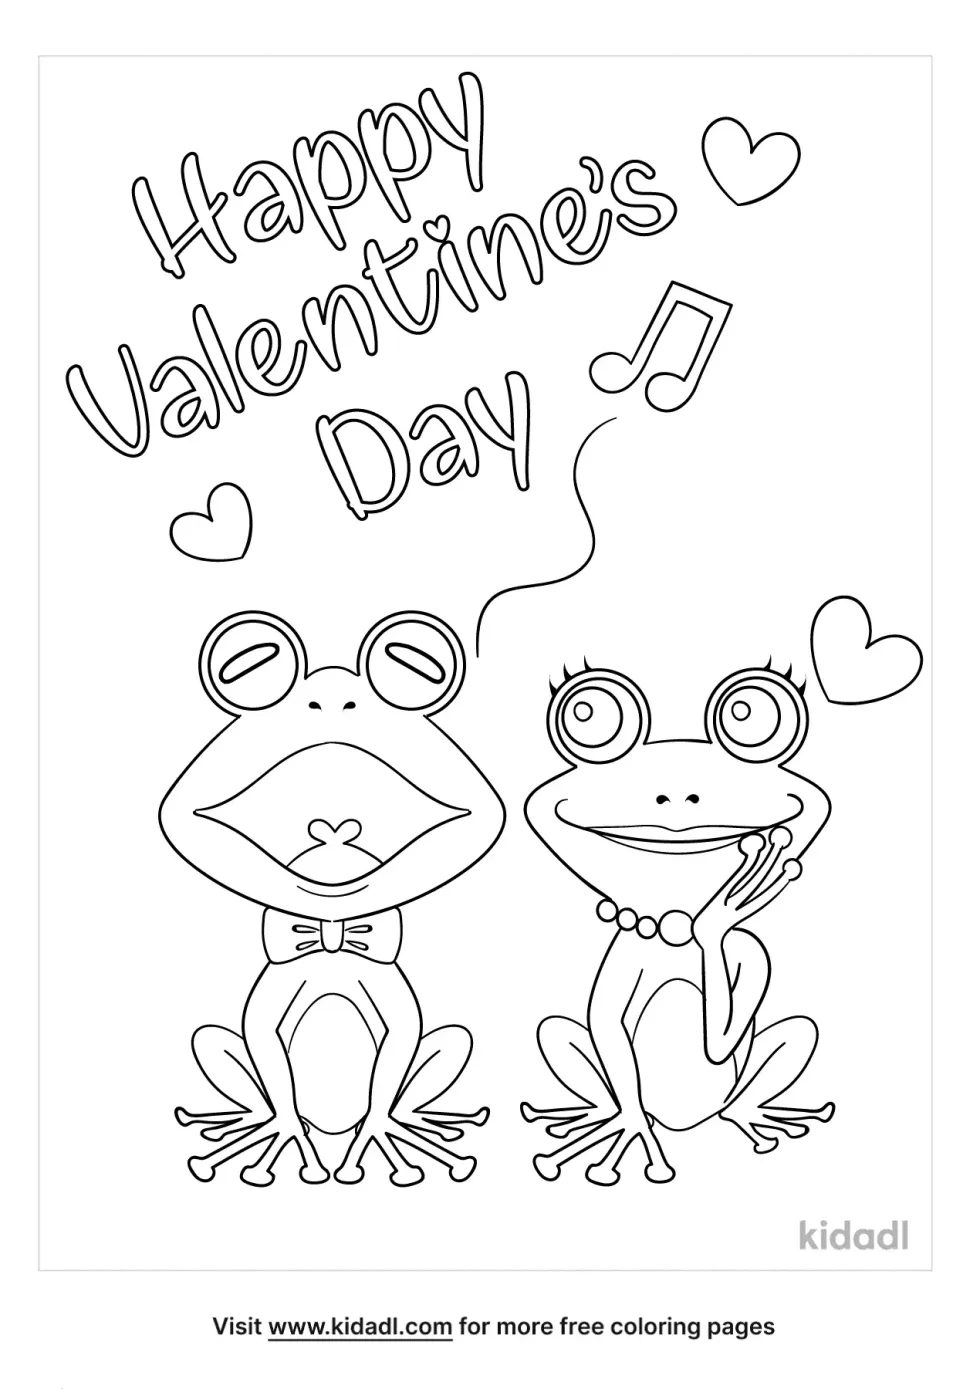 Frog Valentine's Day Coloring Page